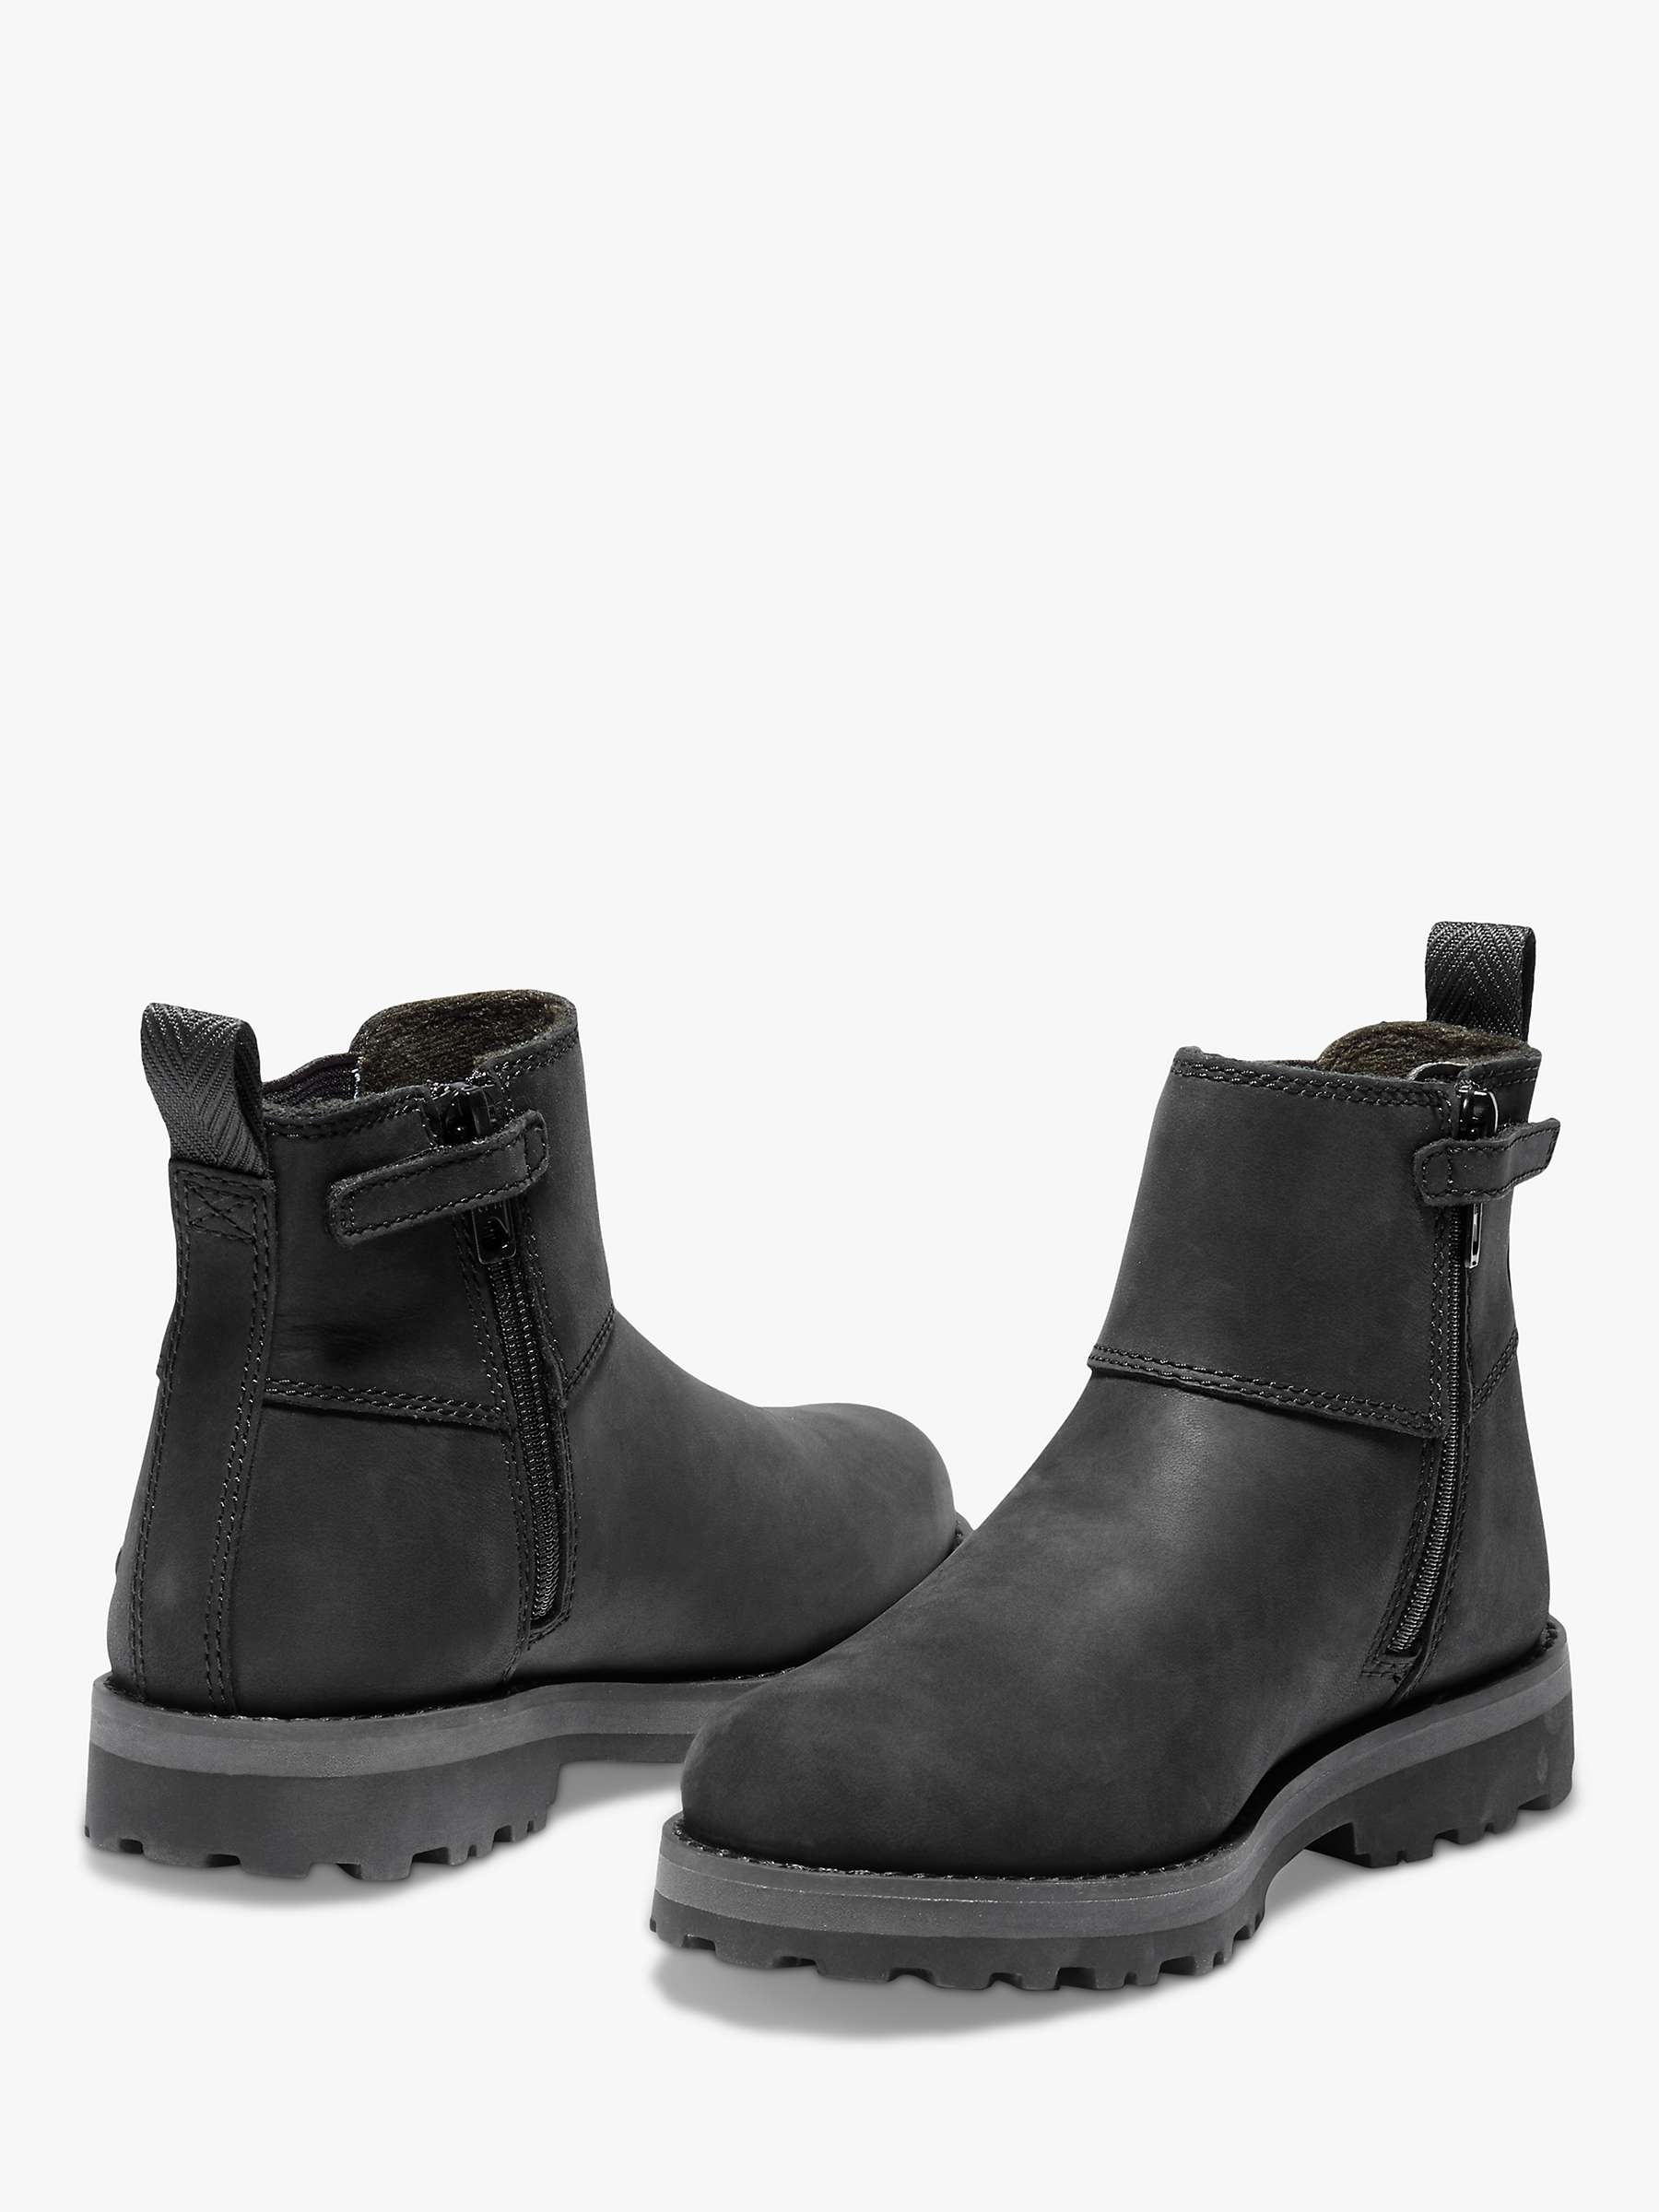 Buy Timberland Kids' Courma Kid Chelsea Boots Online at johnlewis.com